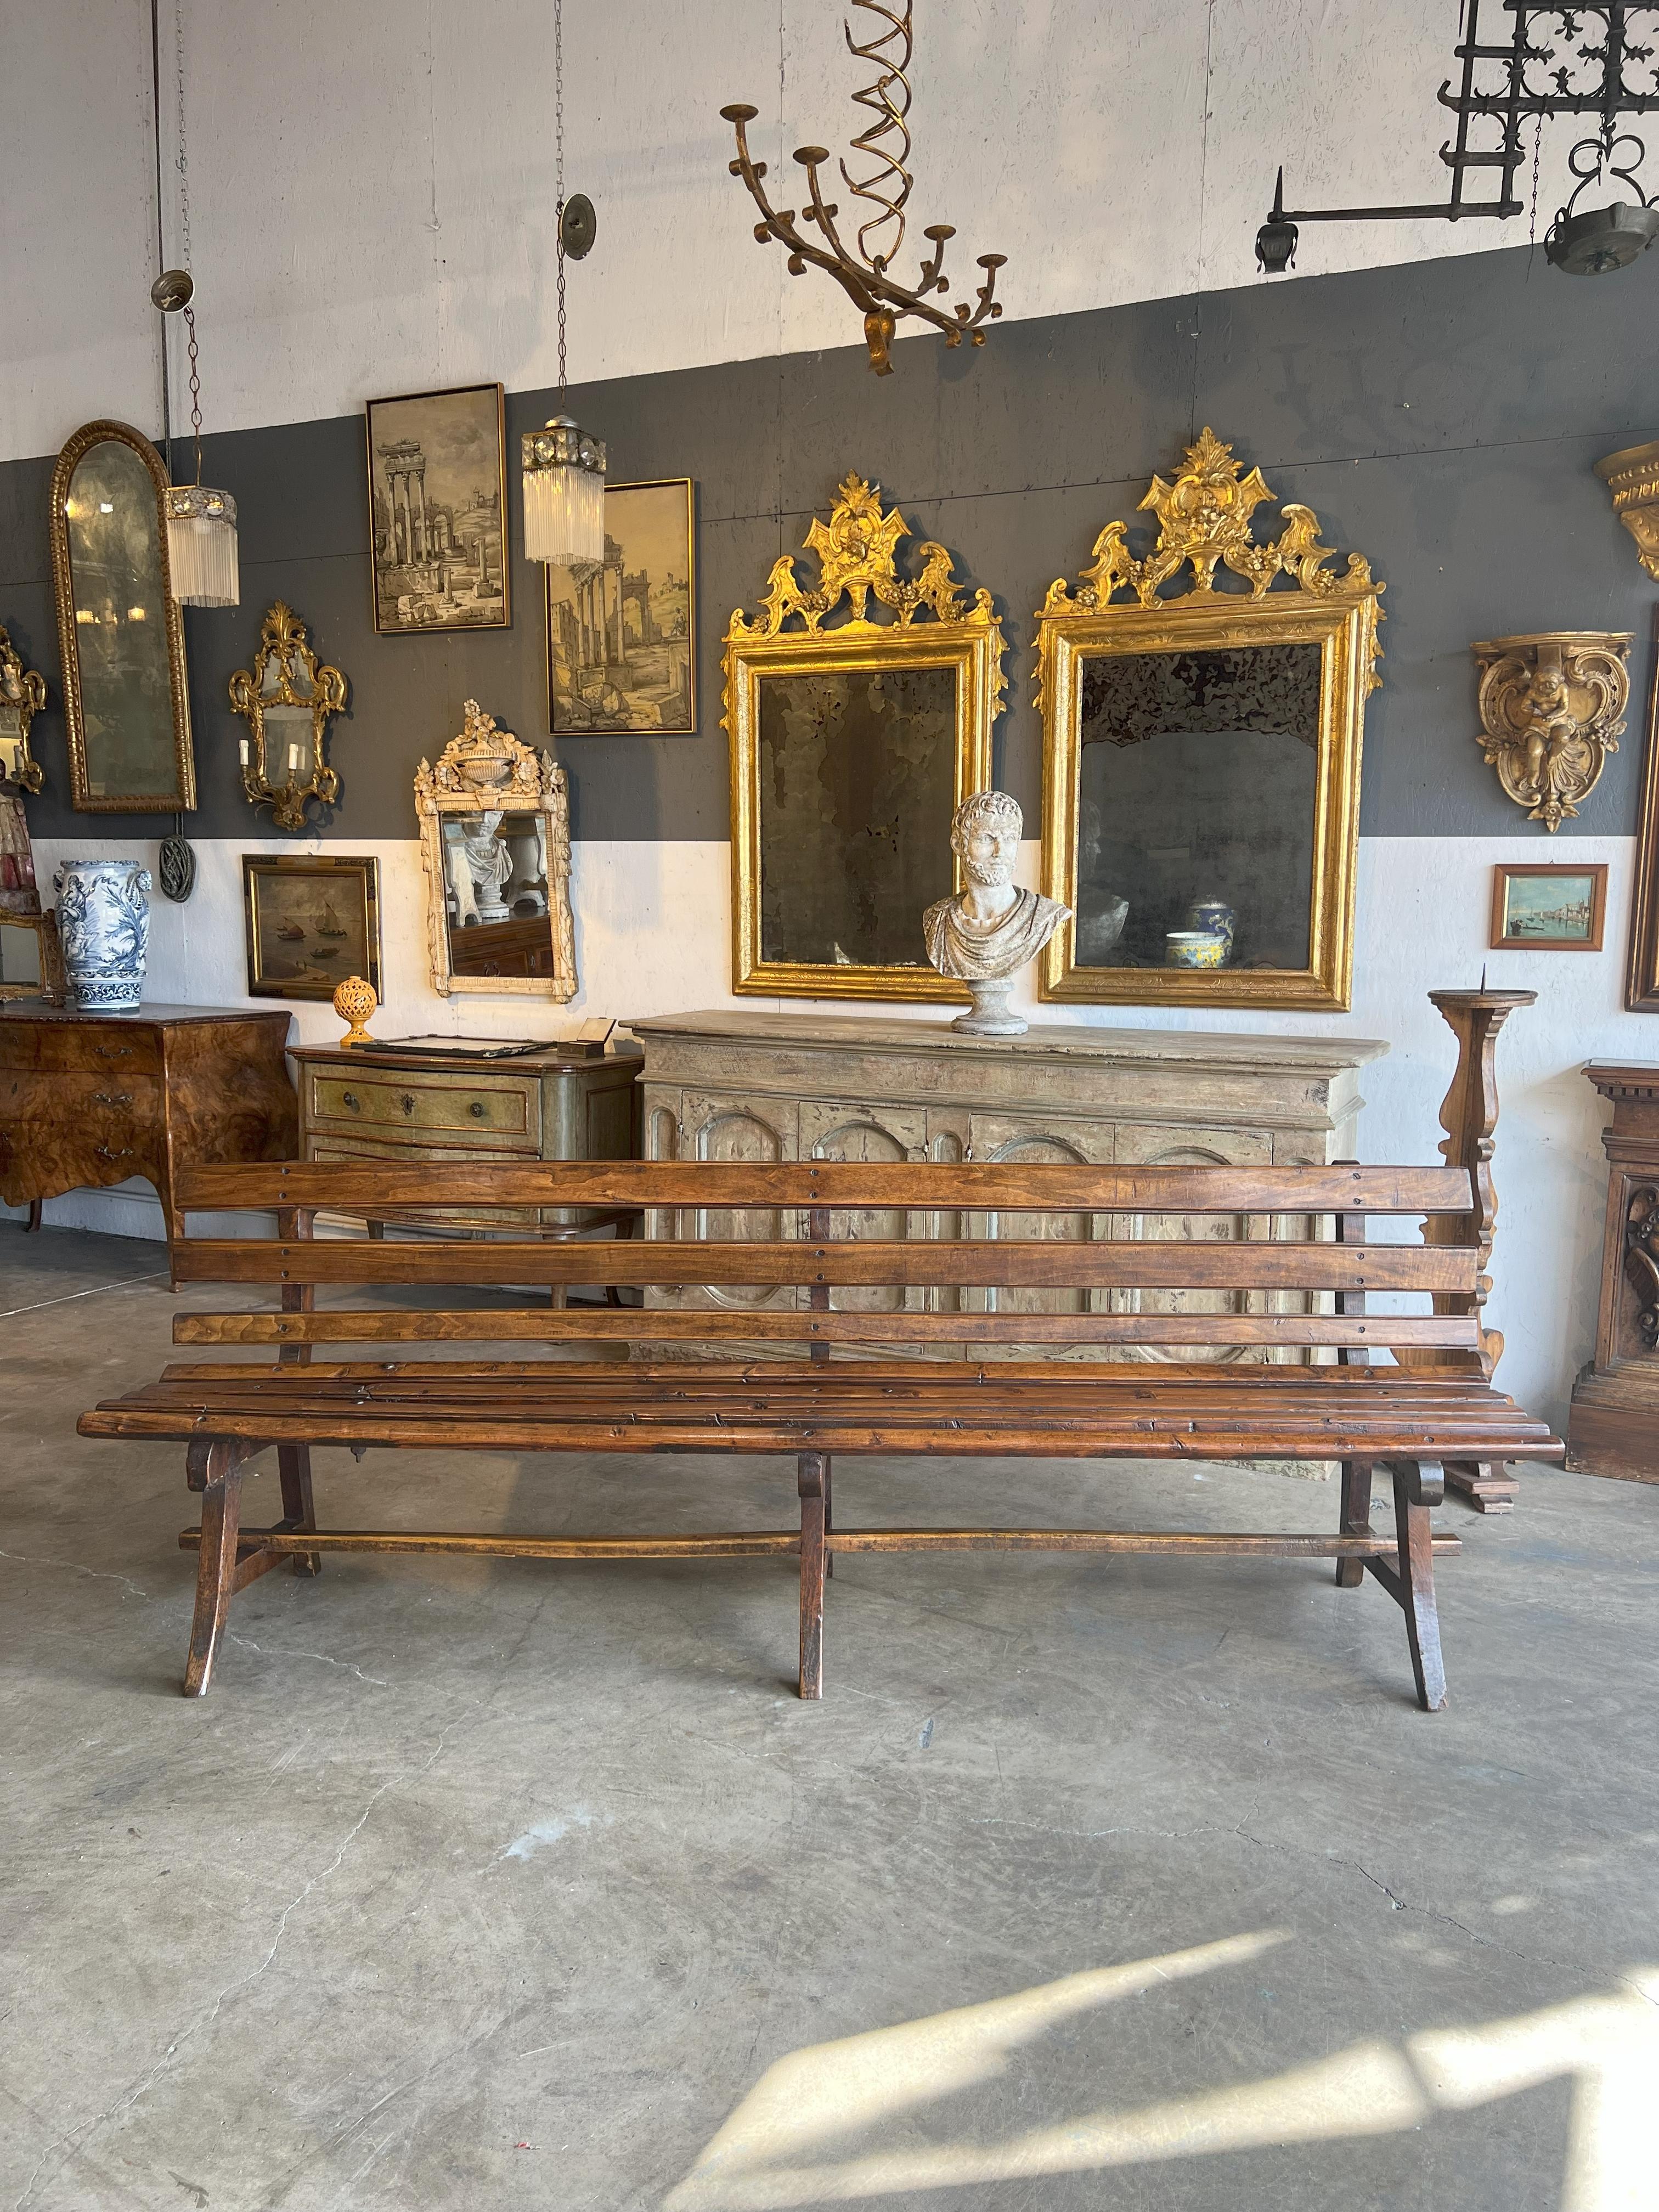 Antique Italian Train Station Long Bench from Torino: 

A Fusion of Wood and Iron the simple beauty of Italian craftsmanship finds its expression in this Train Station Bench from Torino. Crafted entirely from wood and iron bolts, this remarkable